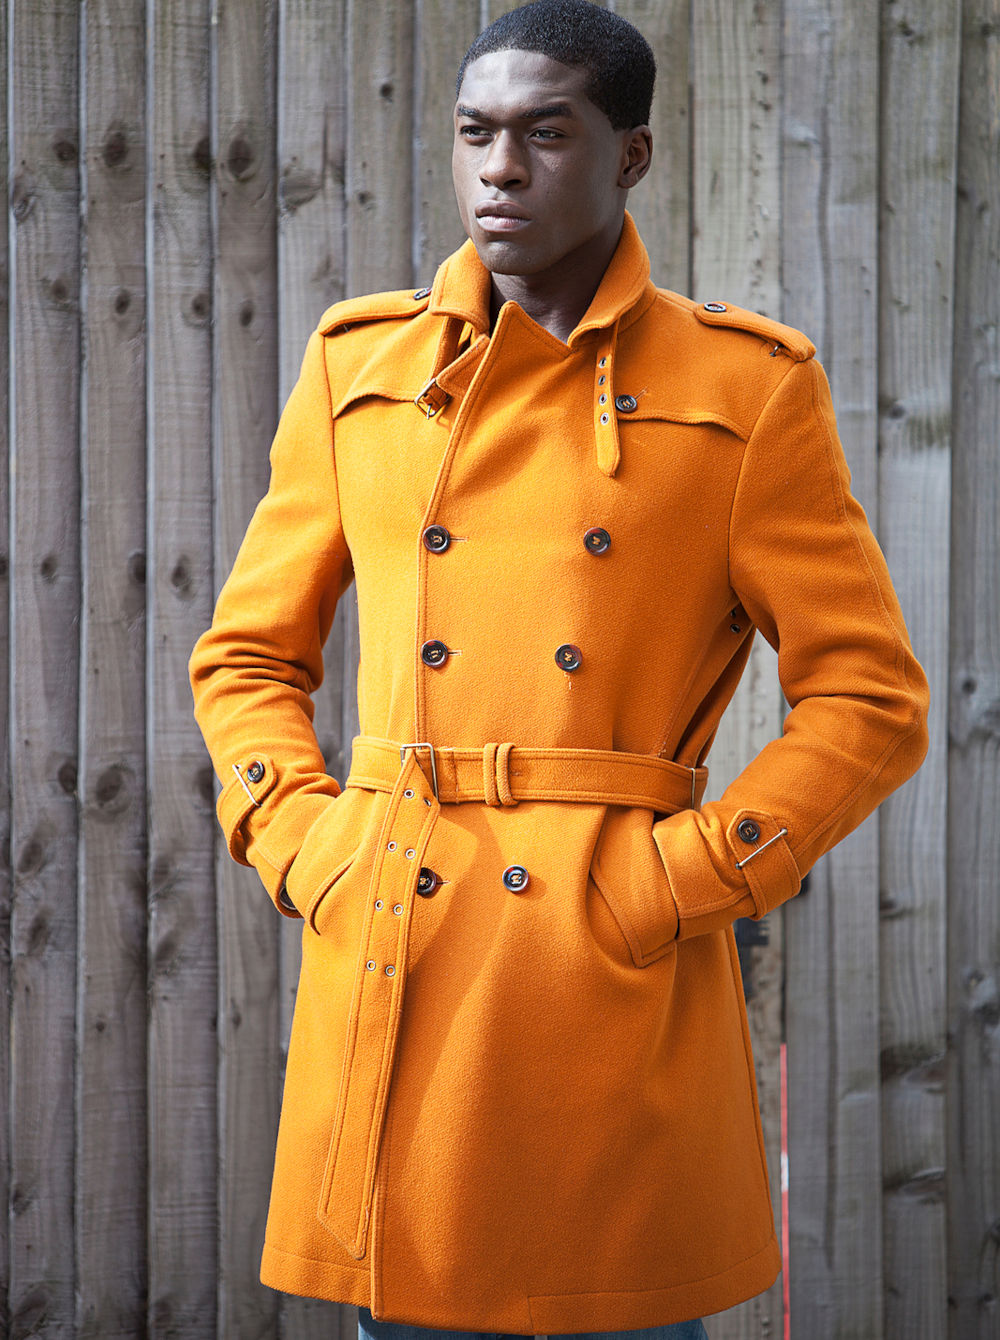 Young African American man in orange trench coat standing with hands in pockets